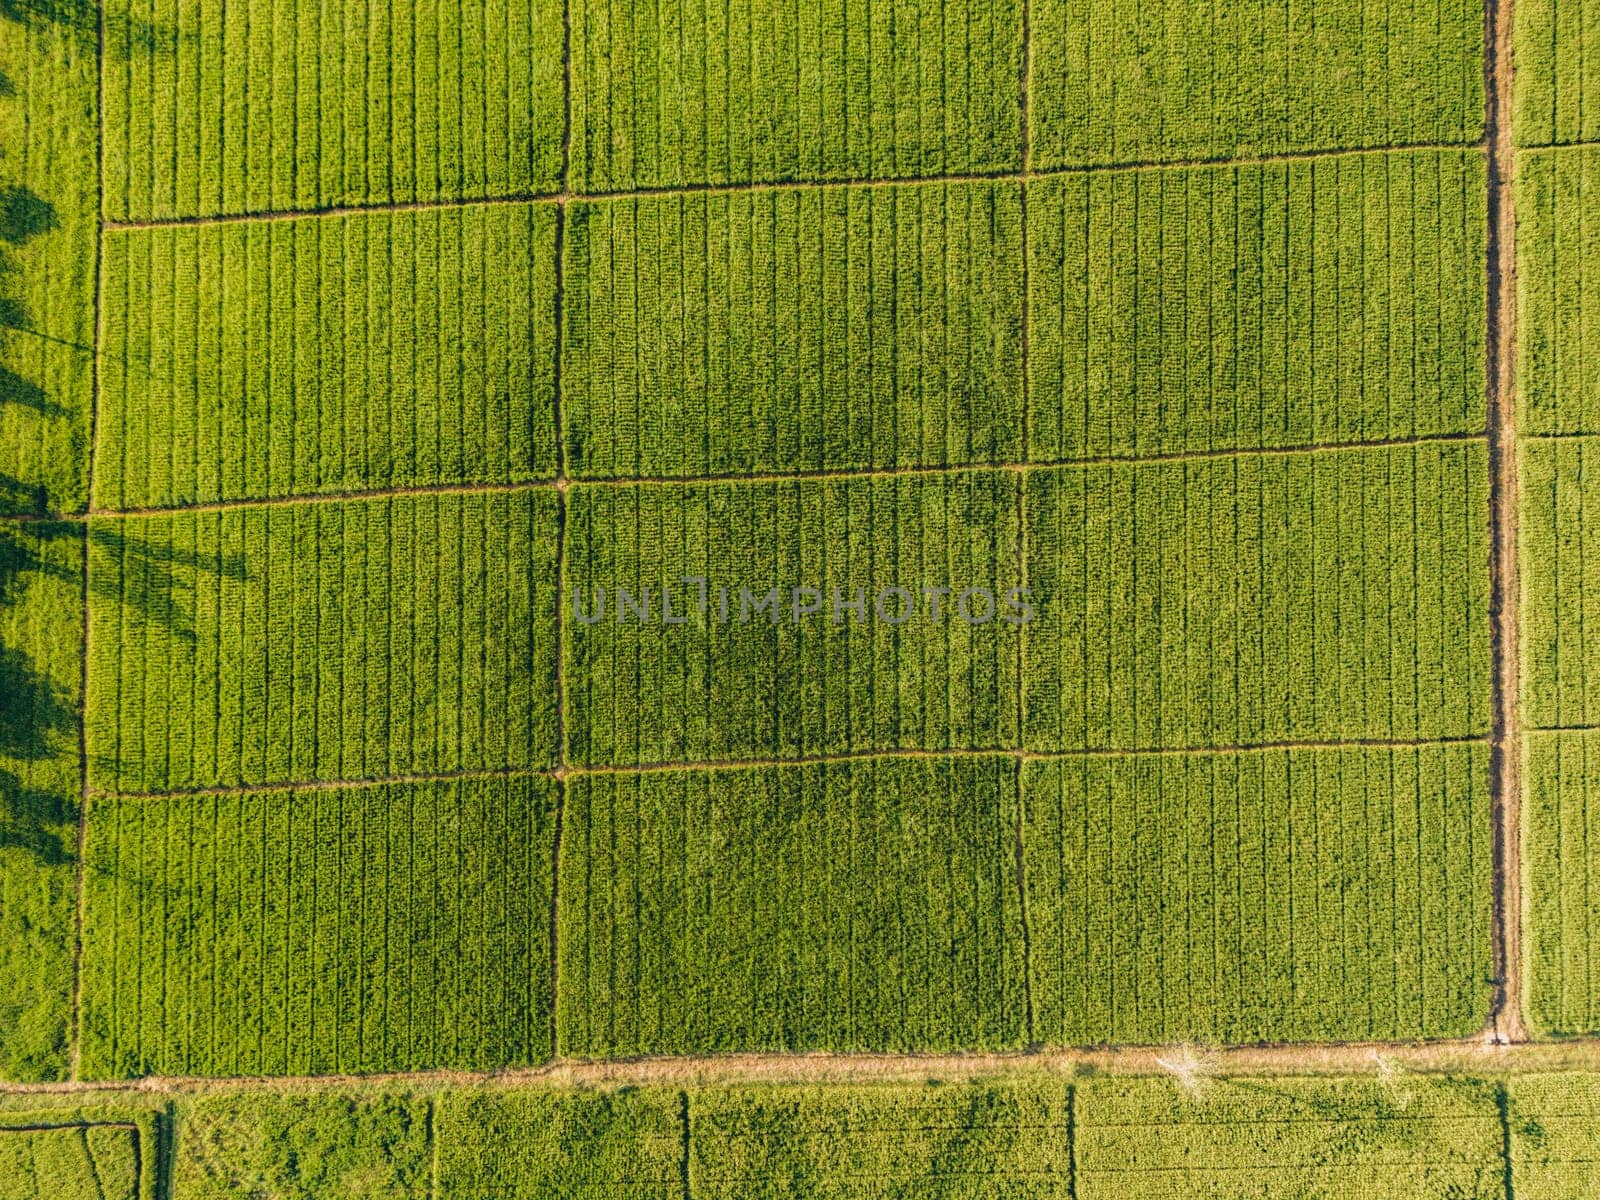 Agriculture field with tall grass aerial view by Popov